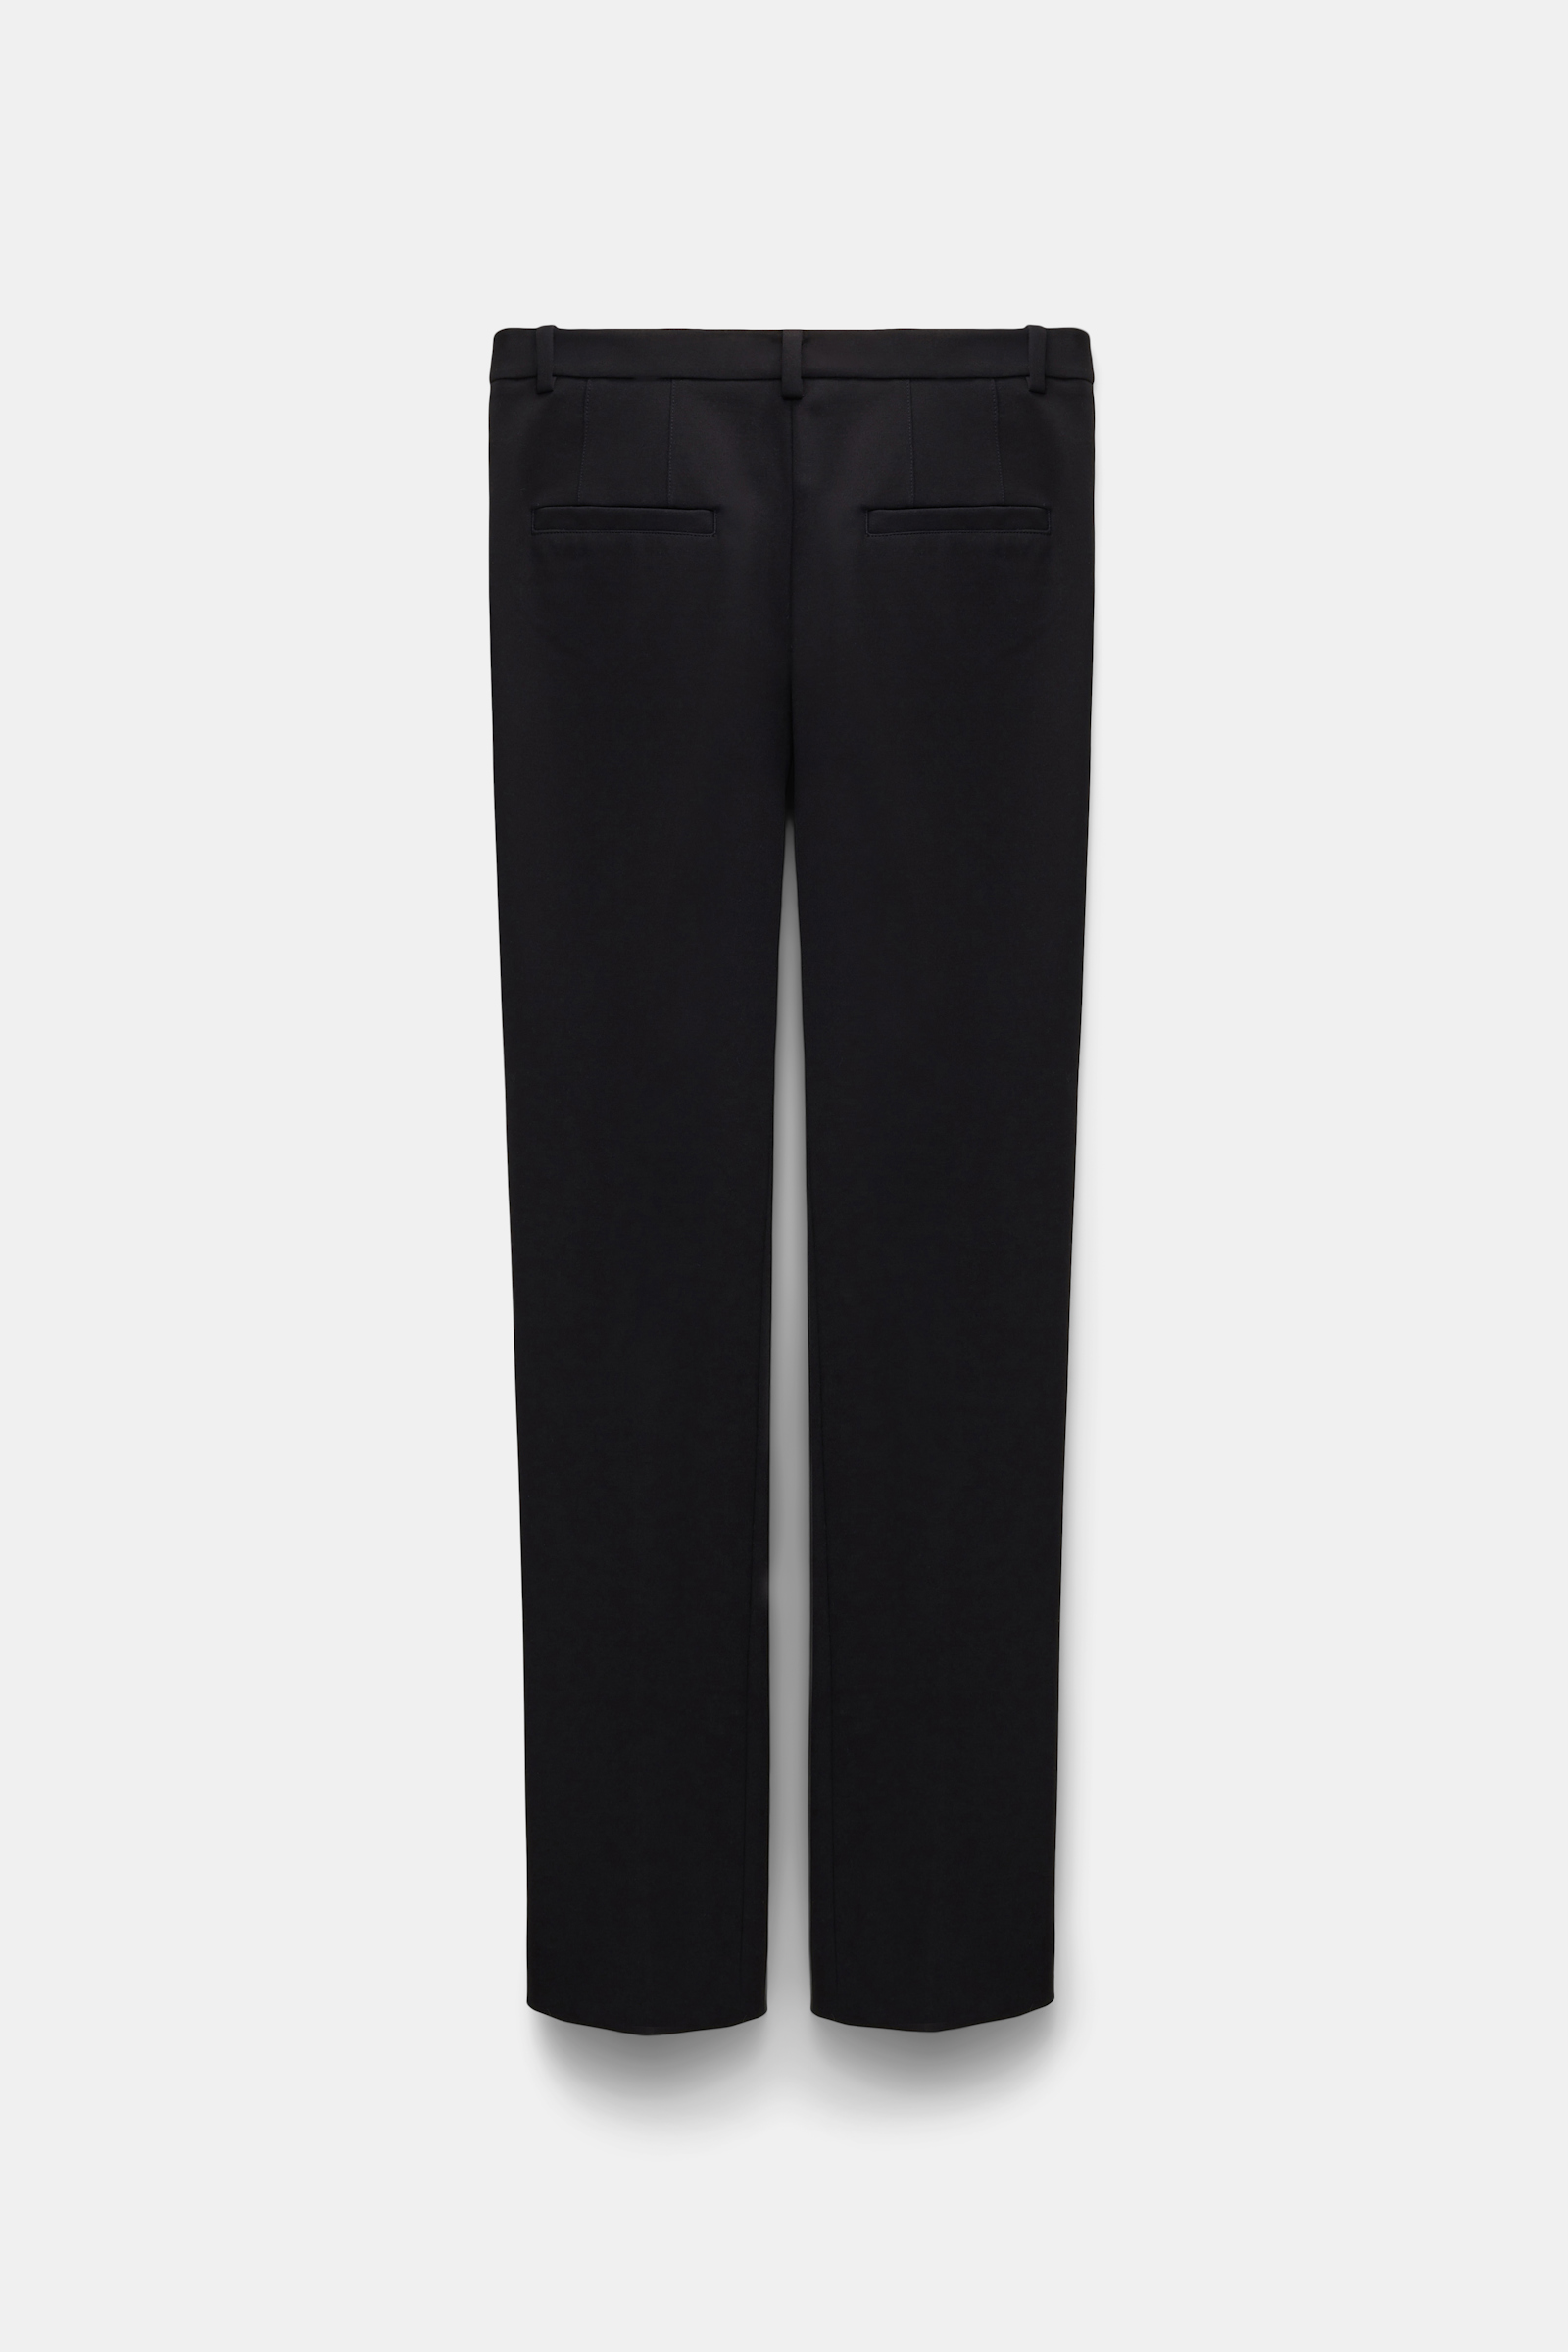 Dorothee Schumacher Cropped flared pants in Punto Milano with Western details pure black